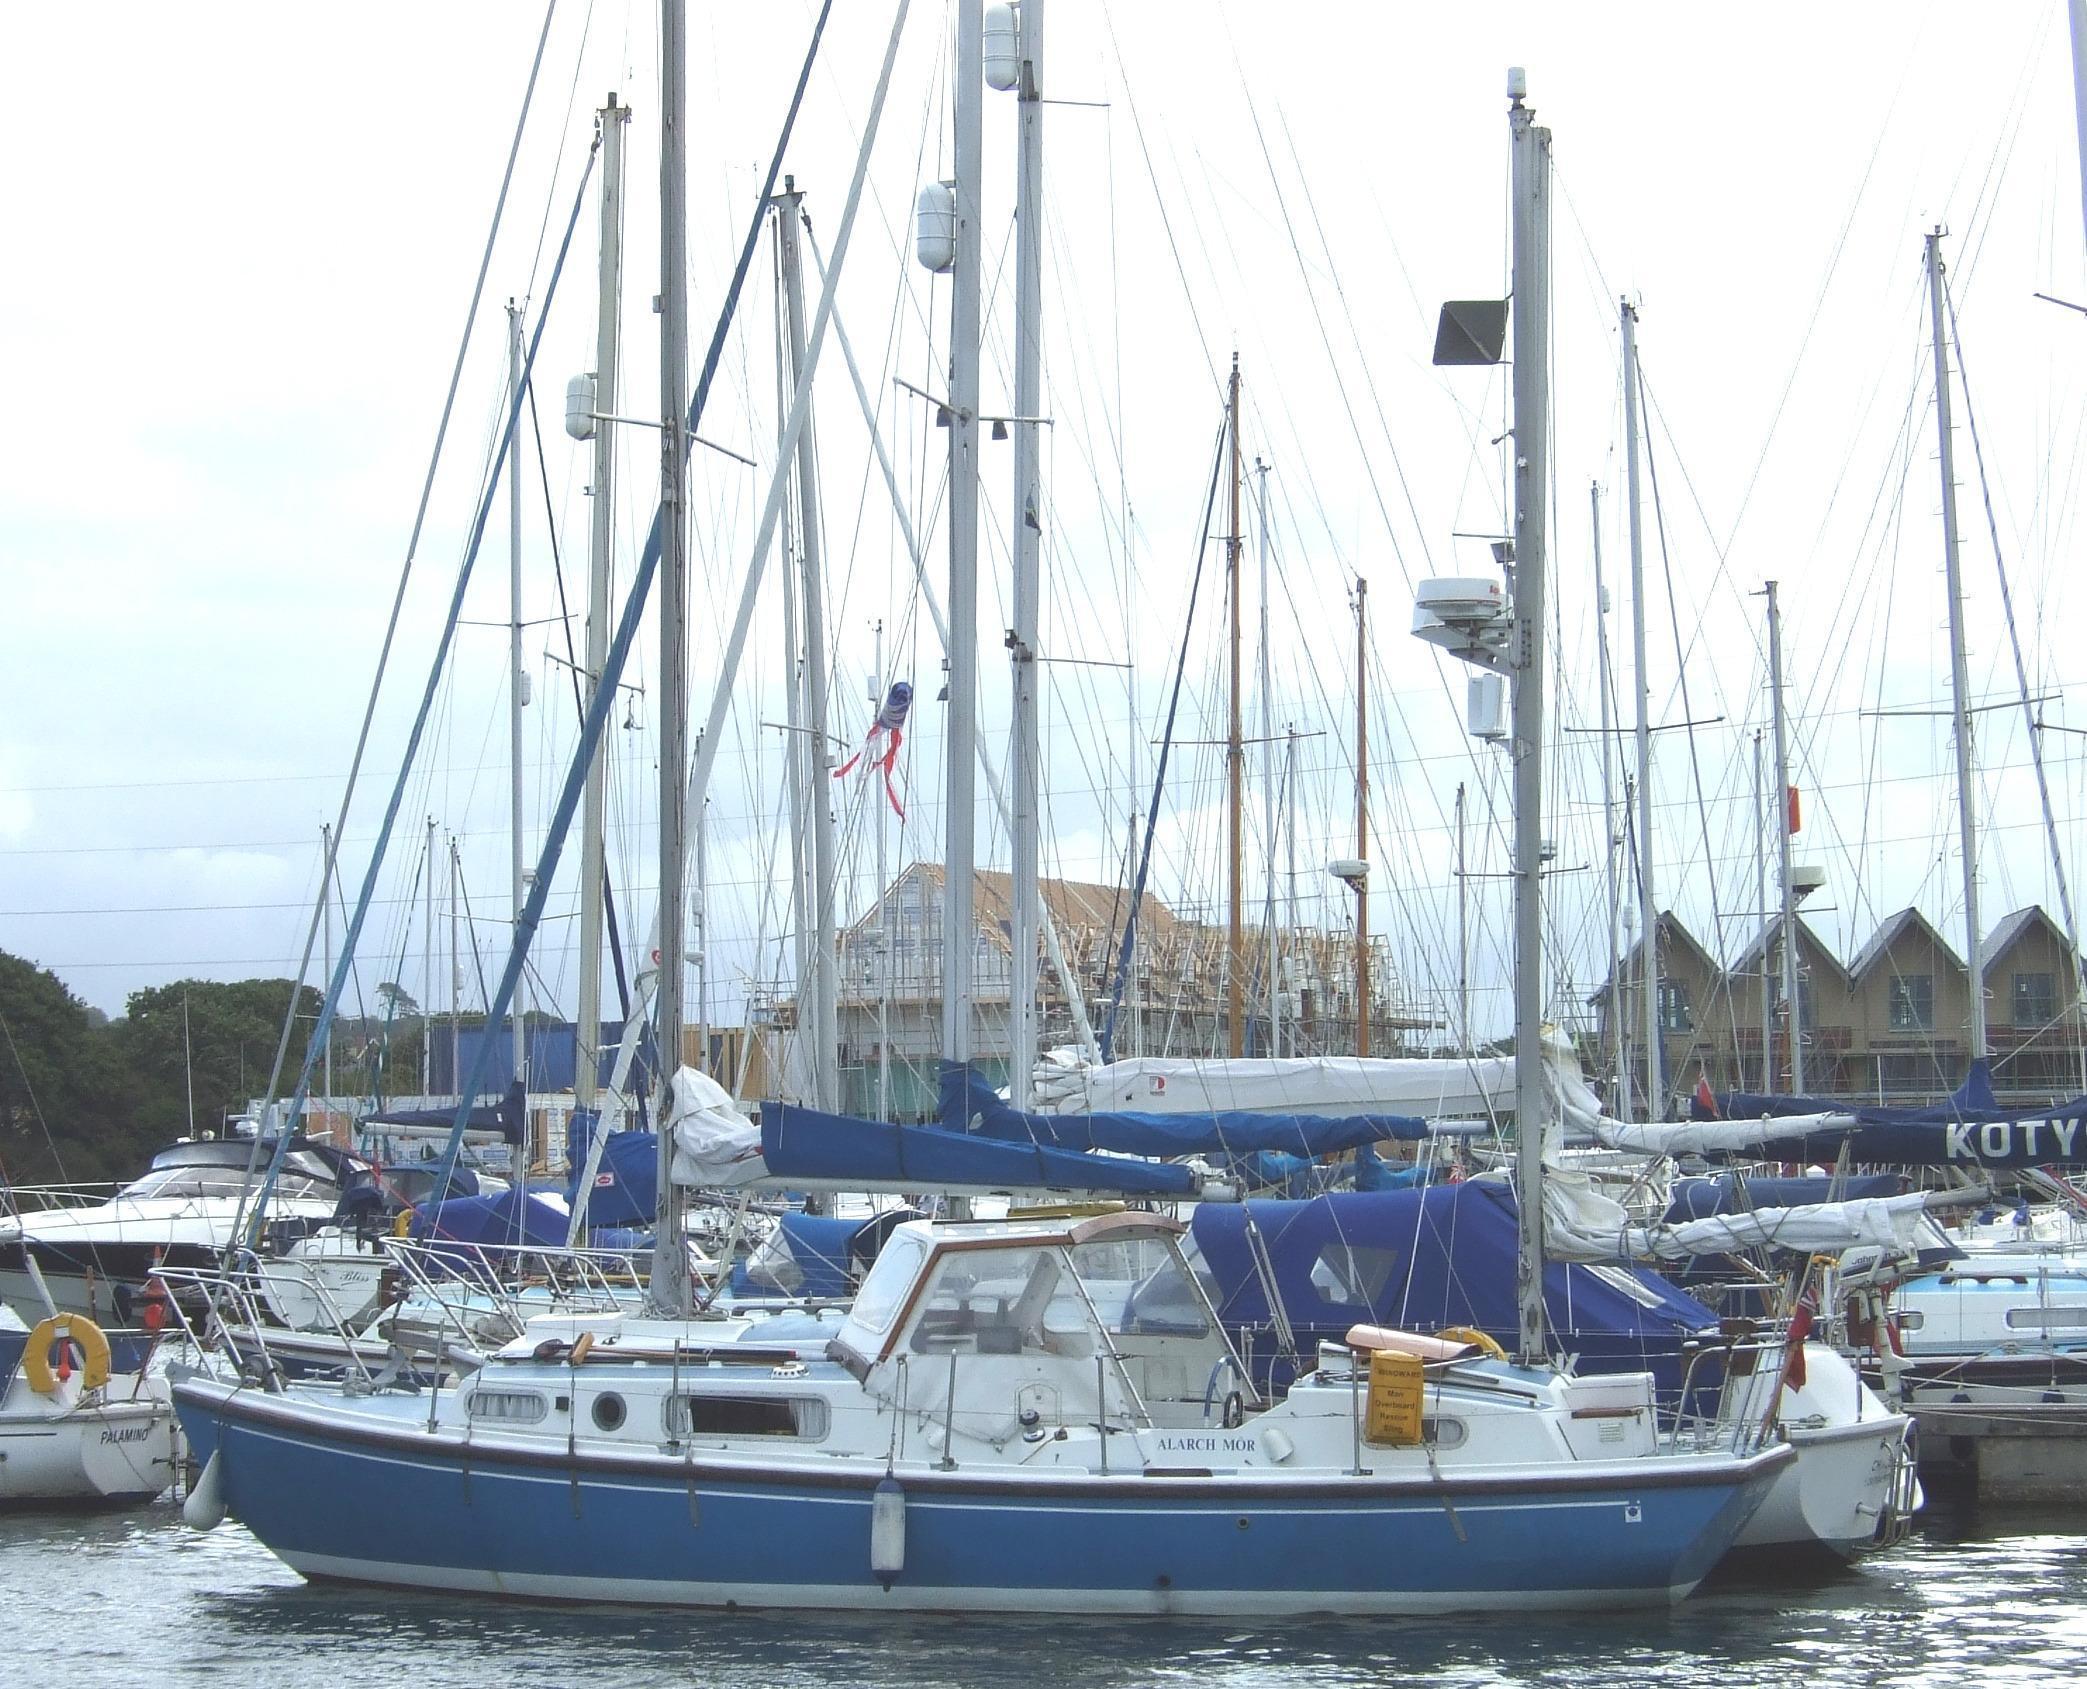 Macwester Wight 30 Ketch, Chichester, West Sussex